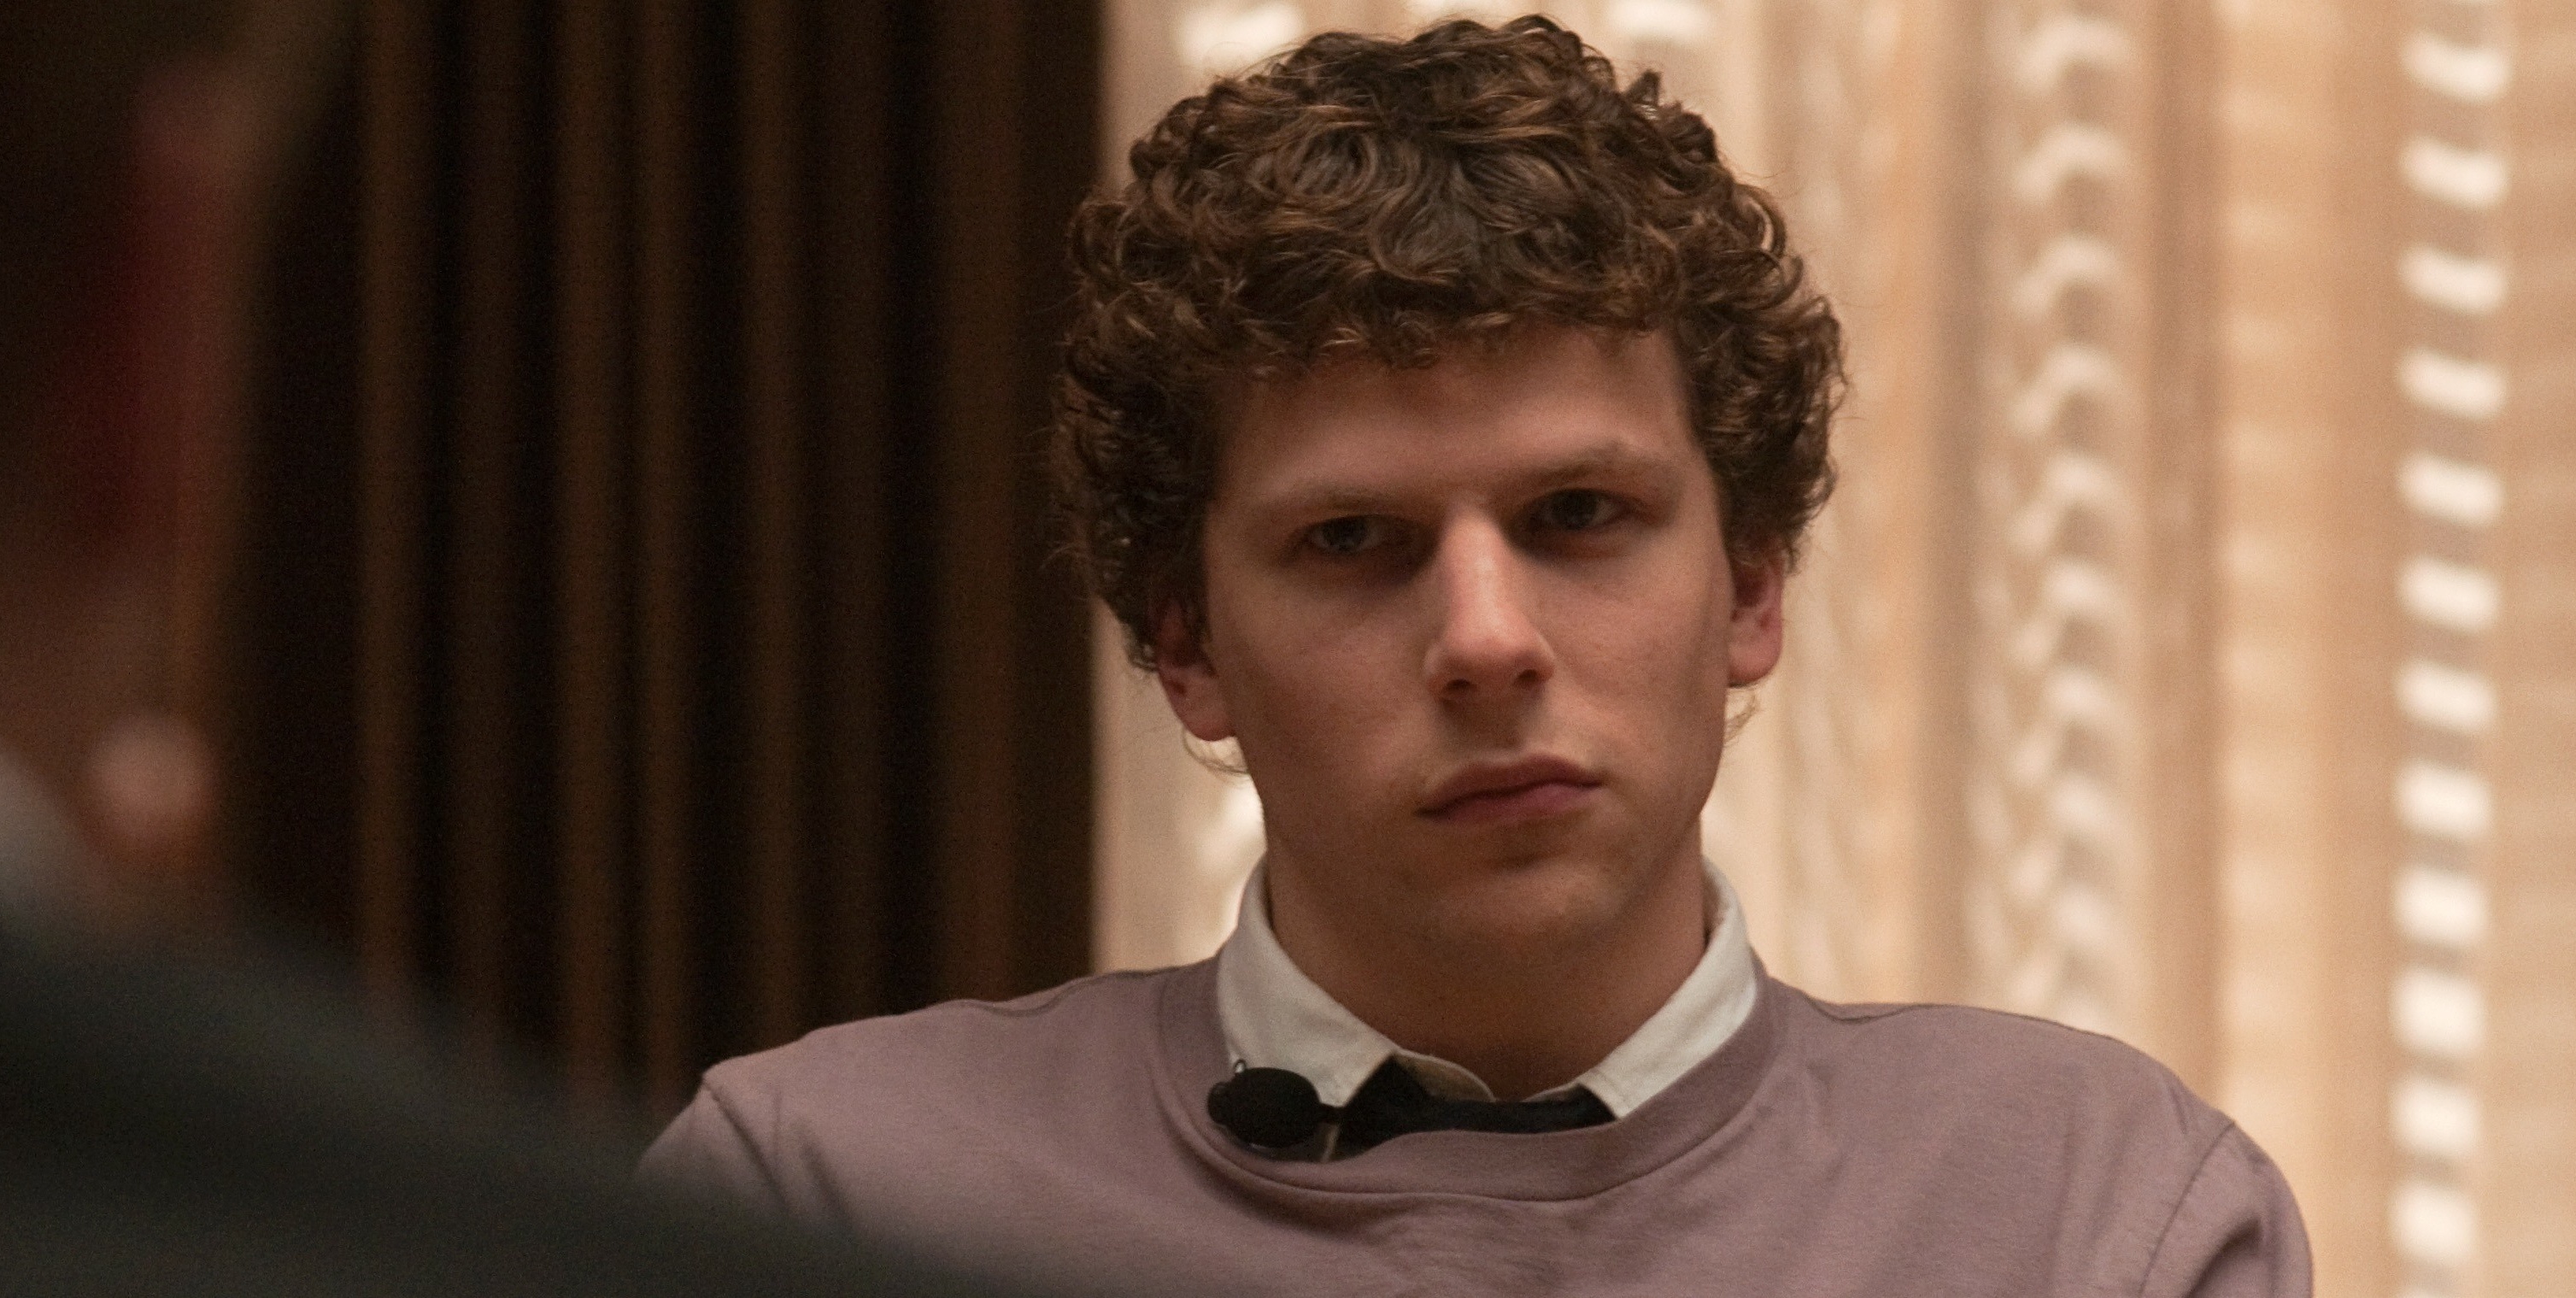 The Social Network, Movie HQ wallpapers, Compelling character study, Social media revolution, 3020x1520 HD Desktop